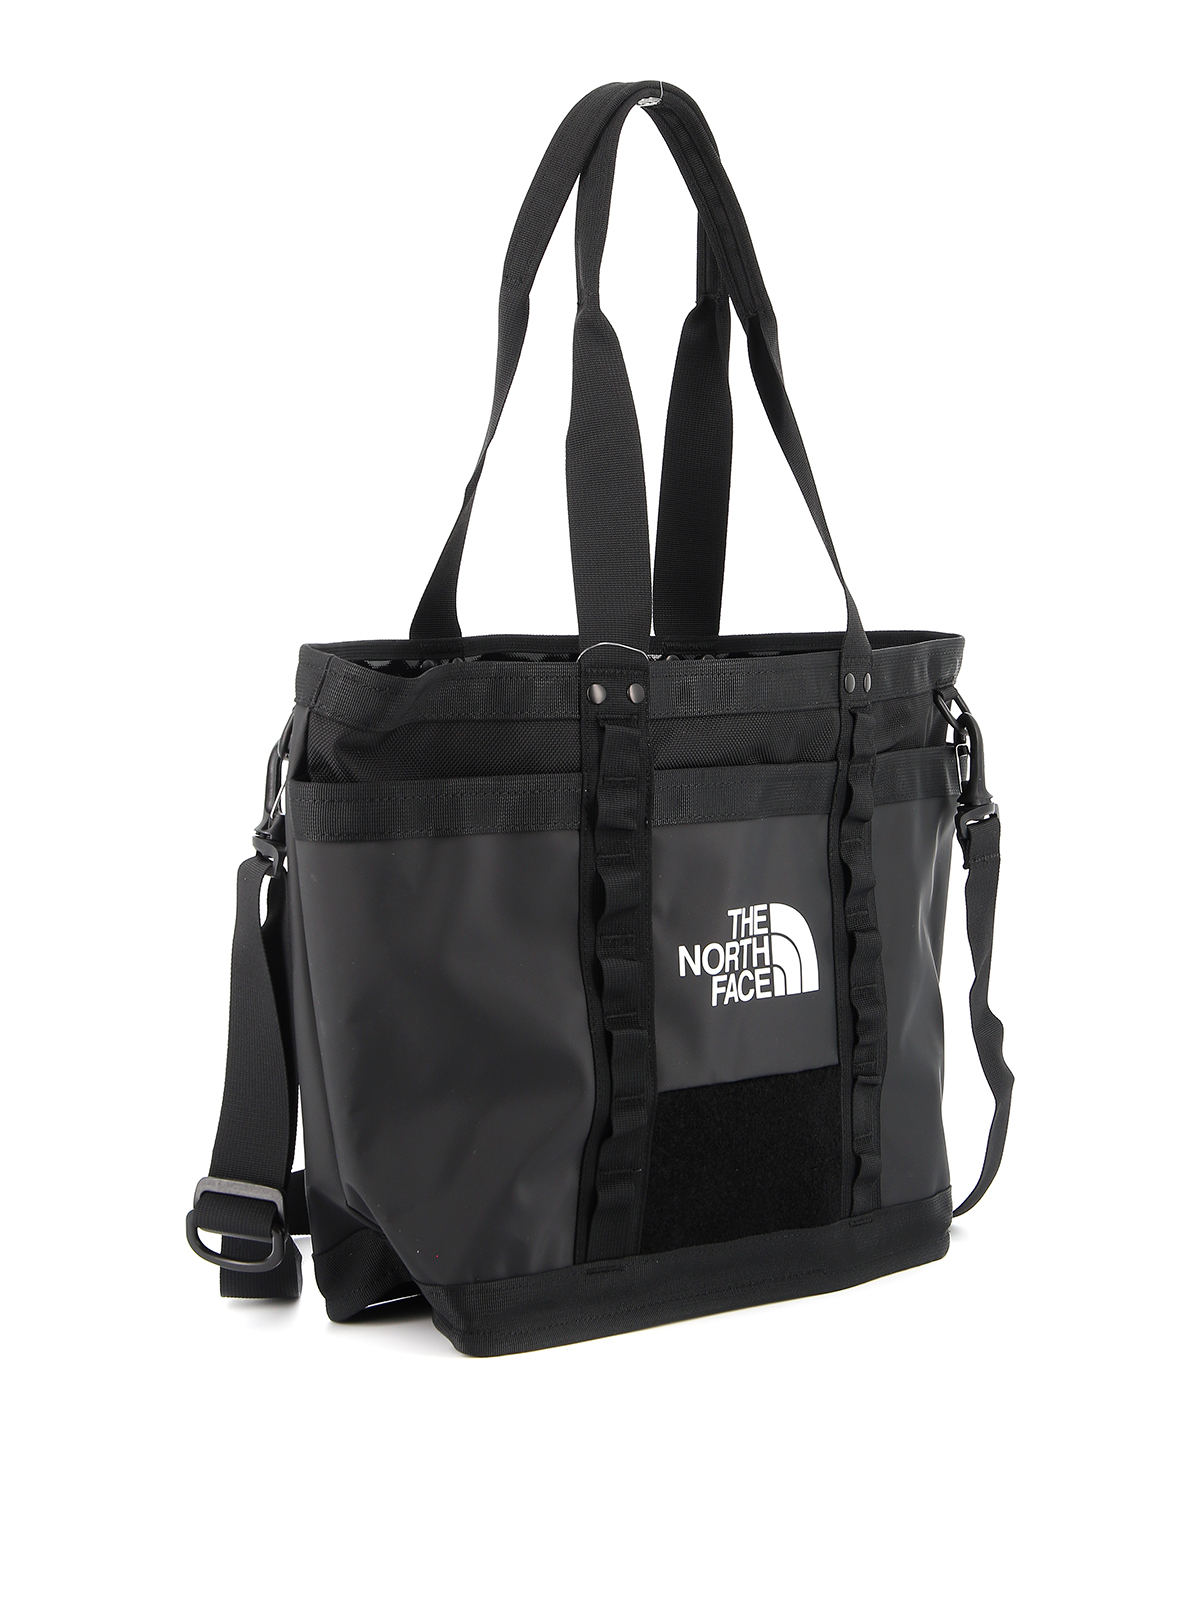 north face totes clearance